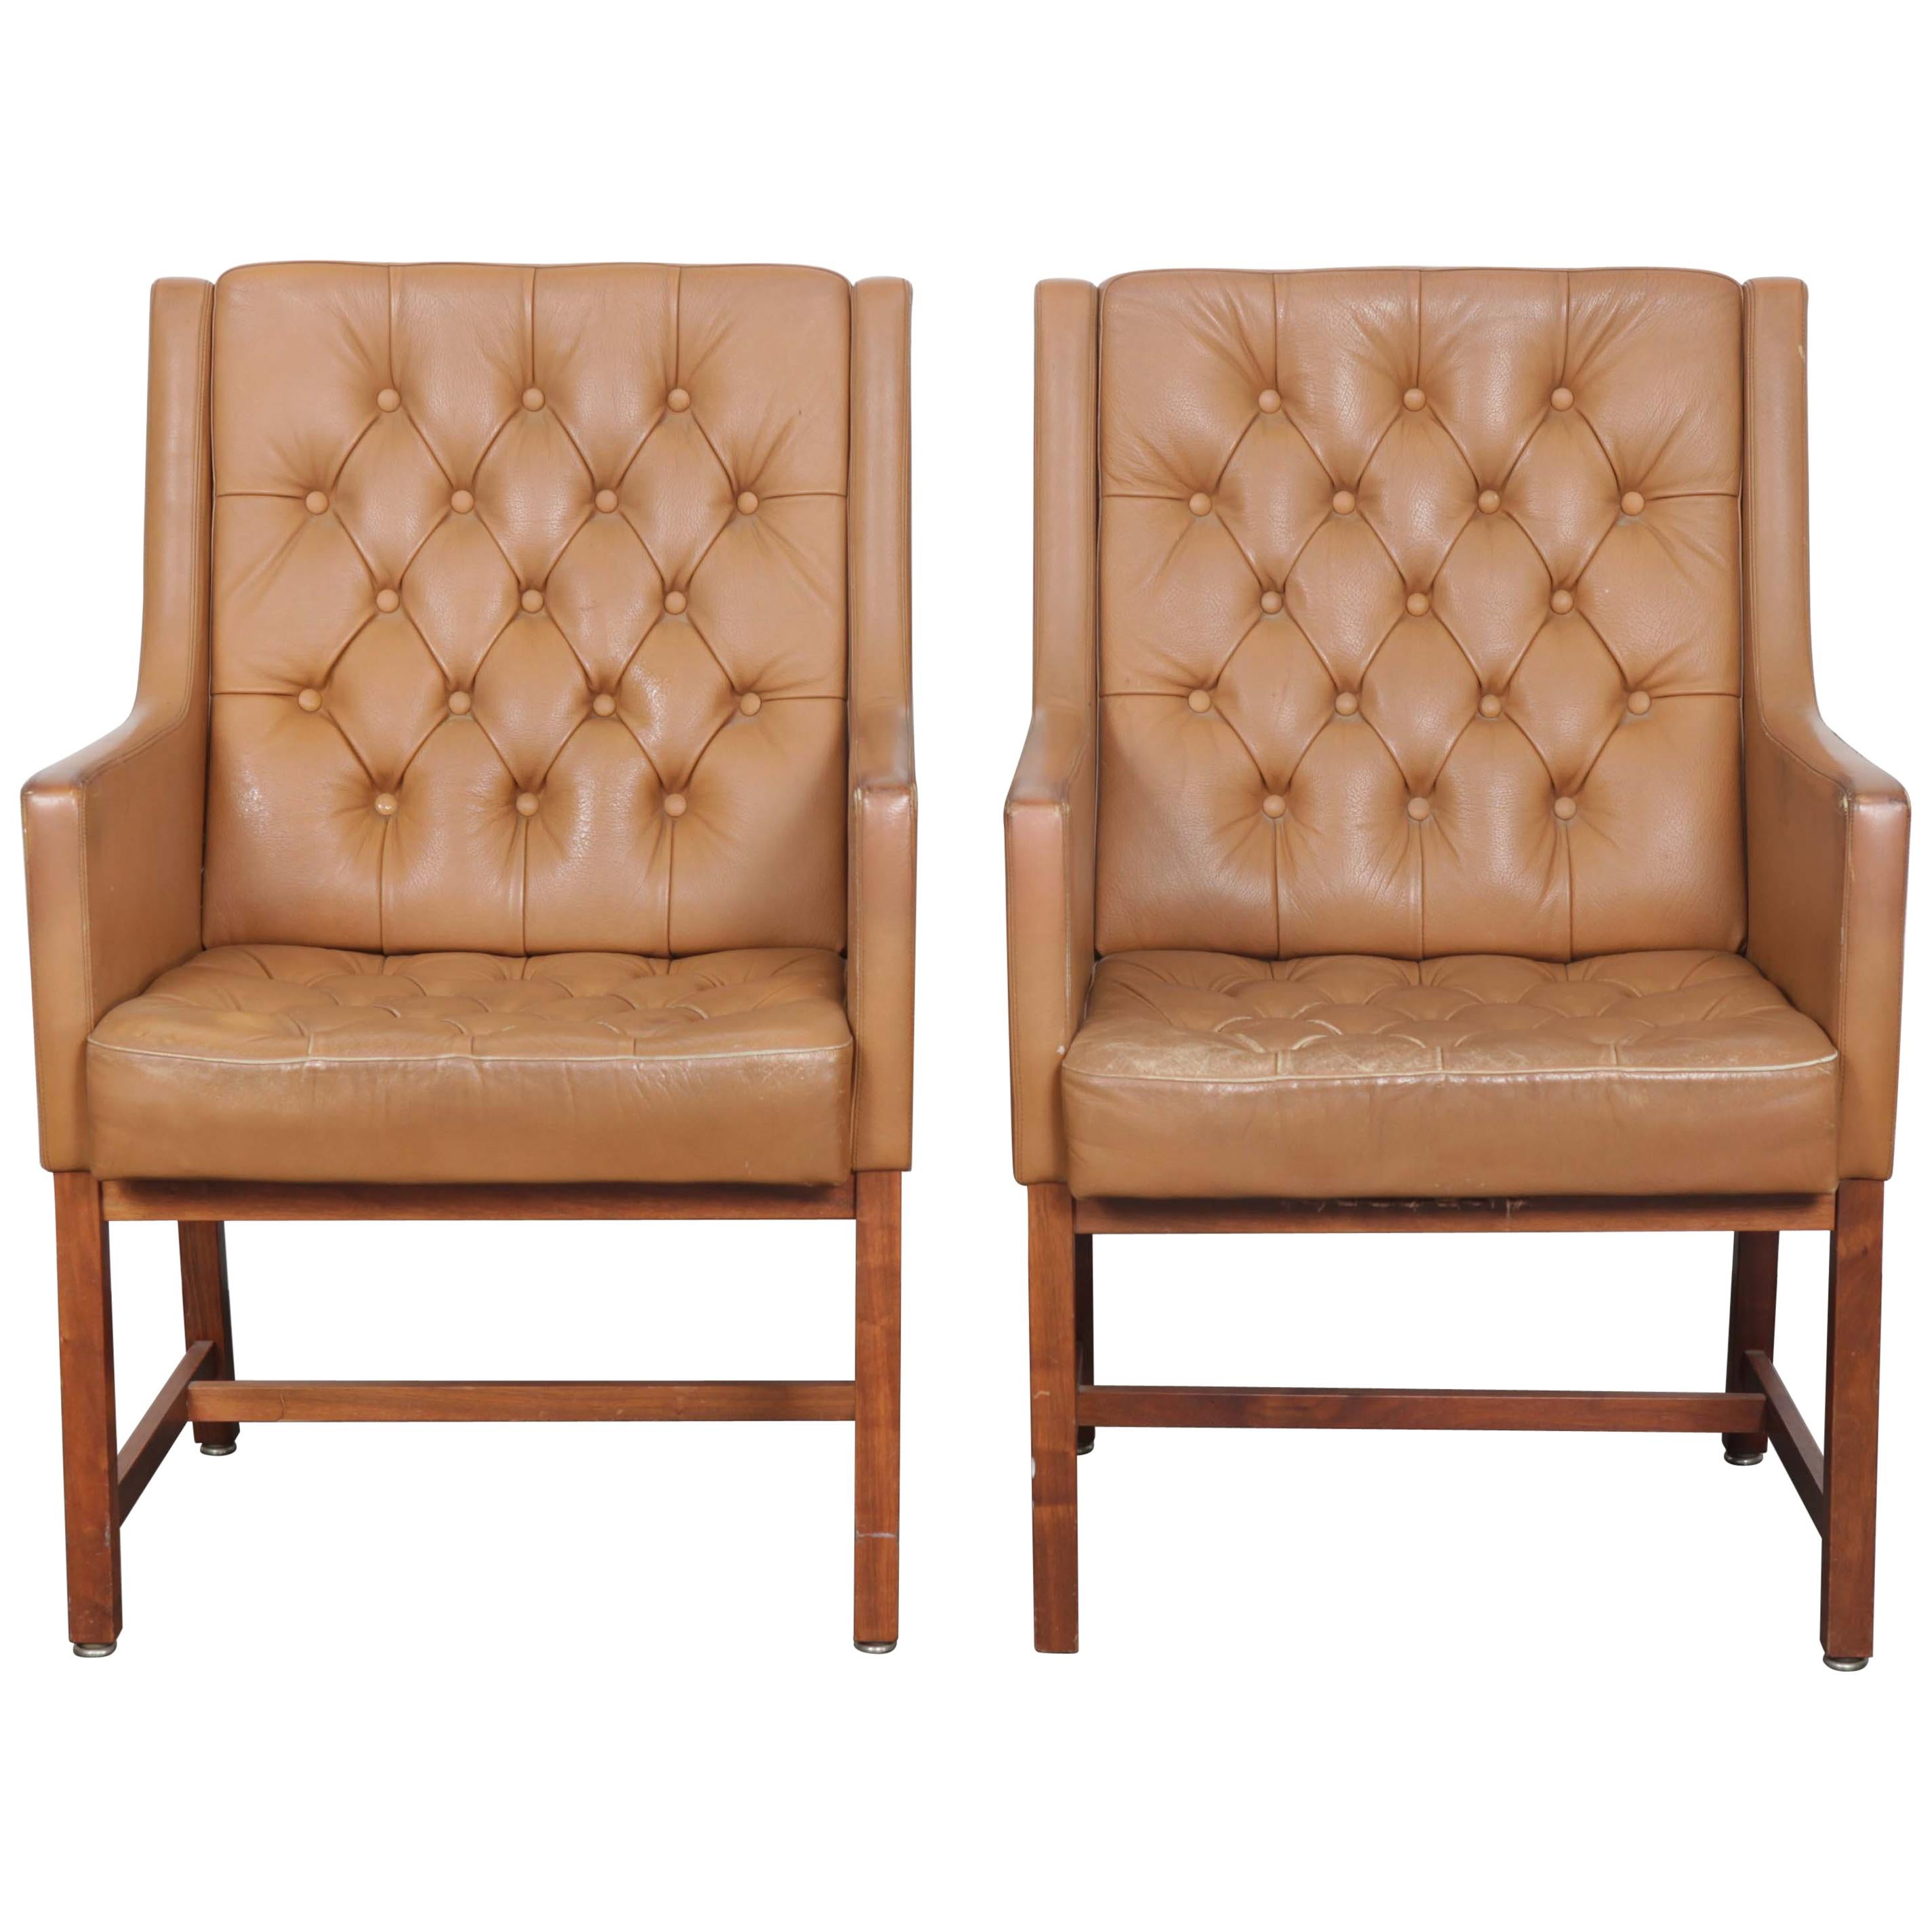 Great example of a pair of brown tufted leather chairs with solid teak legs, designed by Karl Erik Ekselius for JOC Mobler, Sweden. Leather is in very good condition with no tears or damage, and shows a minor amount of nice patina.